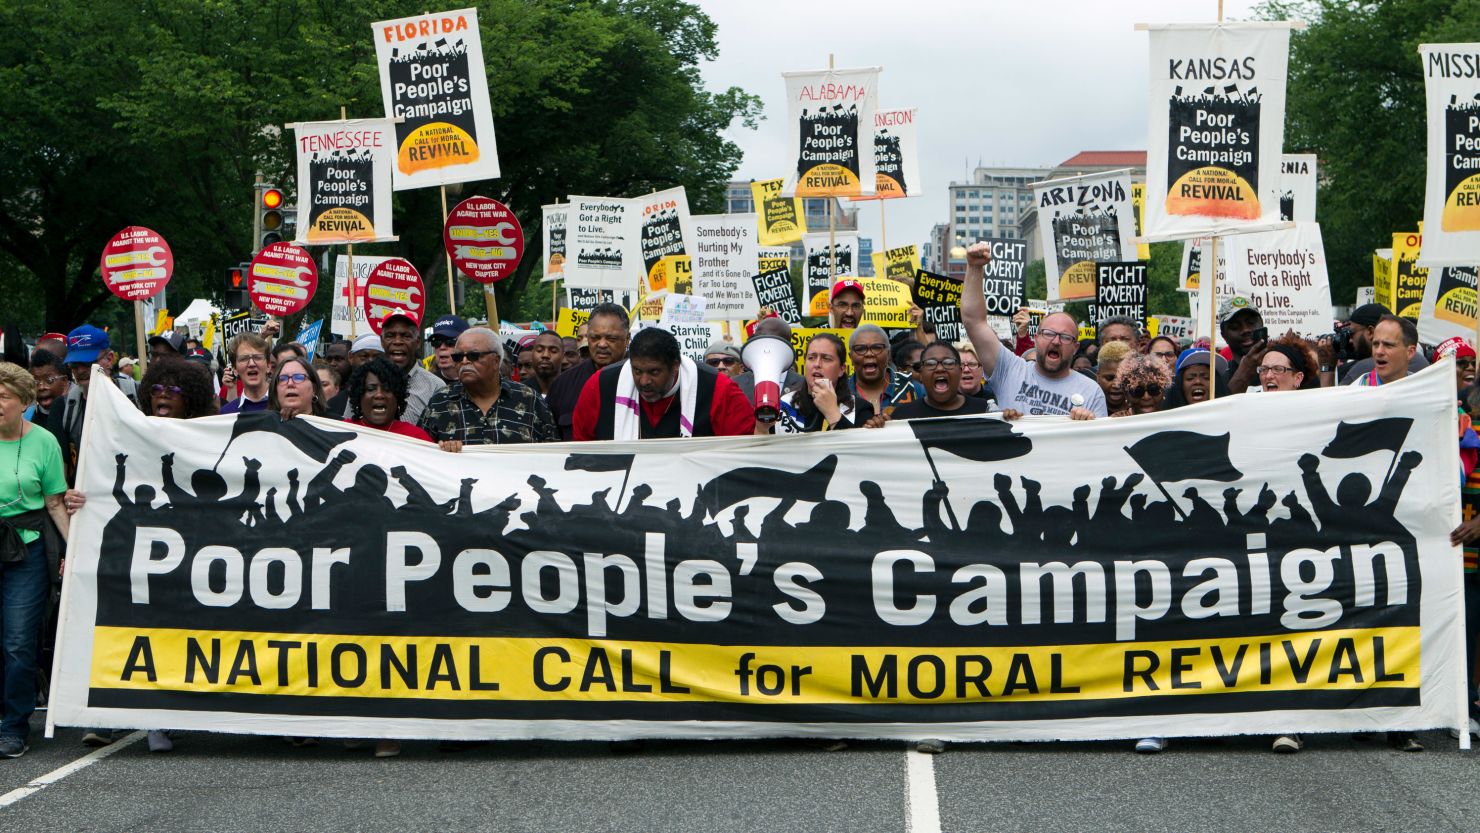 Demonstrators march during the Poor People's Campaign rally in Washington, DC, on June 23, 2018.